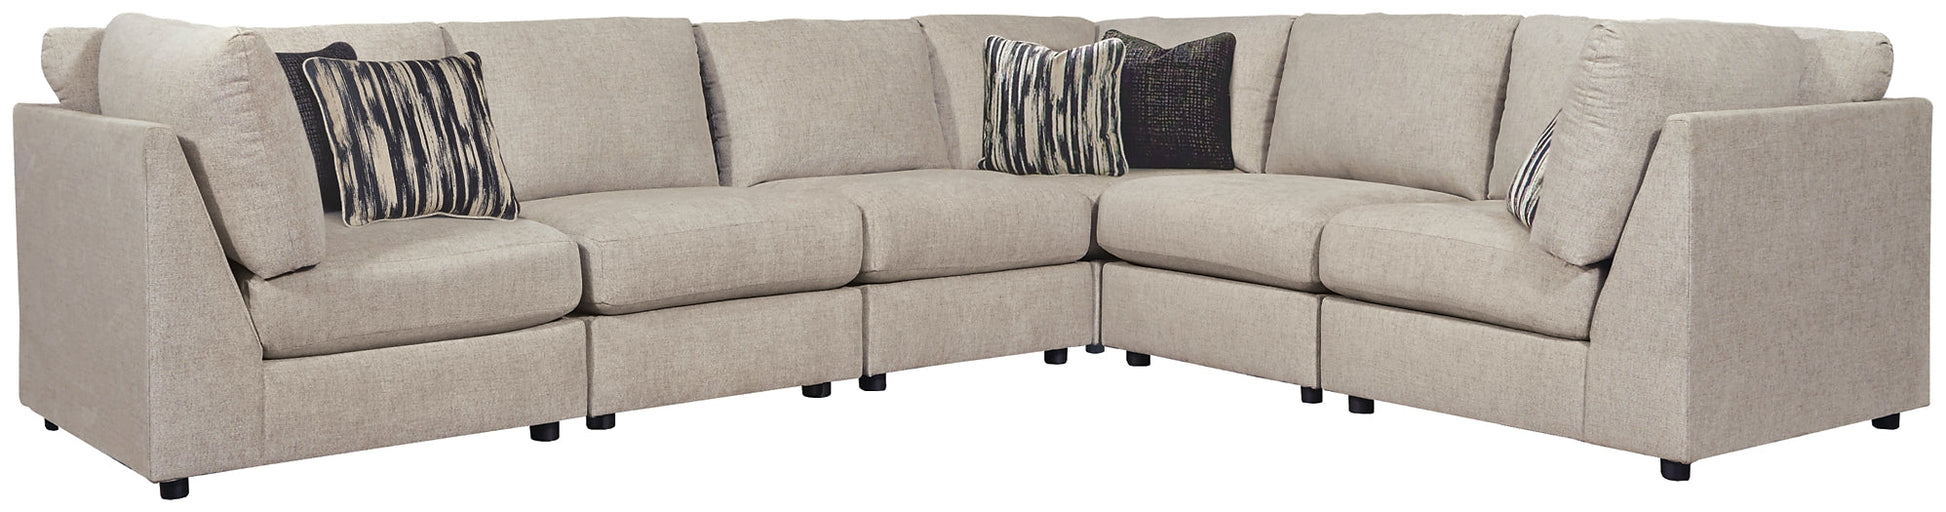 Kellway 6-Piece Sectional Smyrna Furniture Outlet